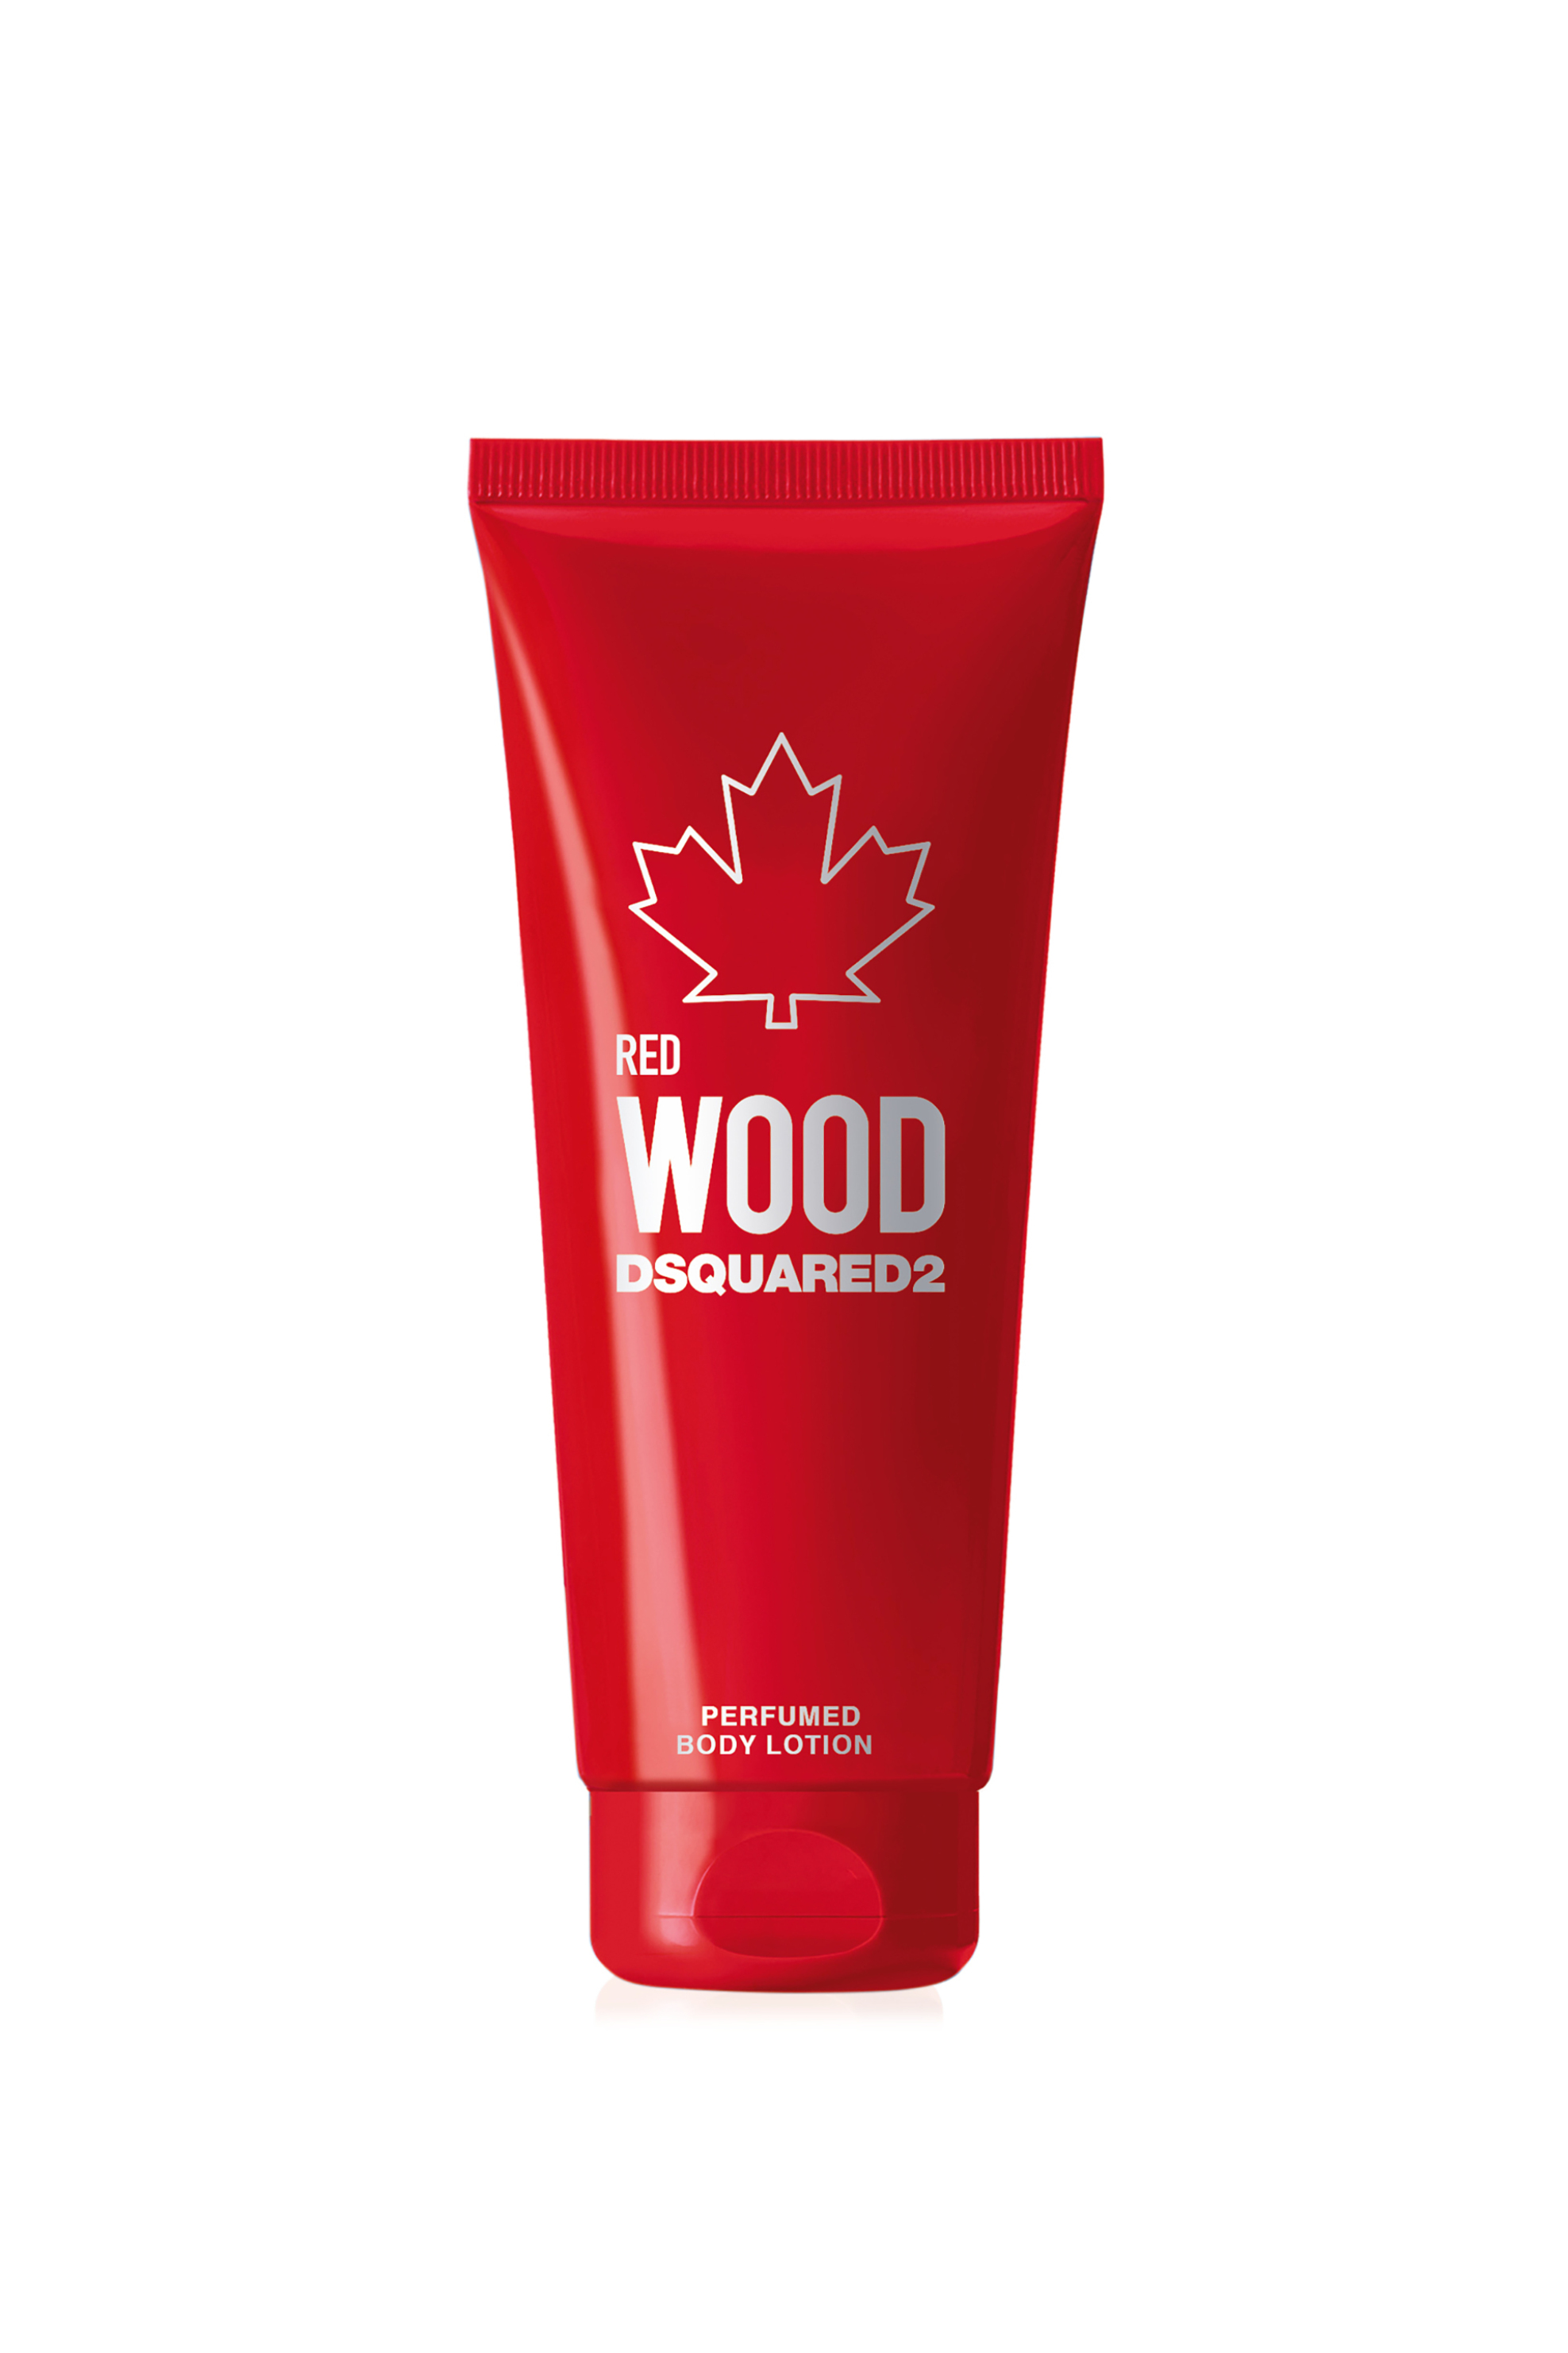 Dsquared2 Wood Red Pour Femme Perfumed Body Lotion Tube 200 ml - 5C50 1054871